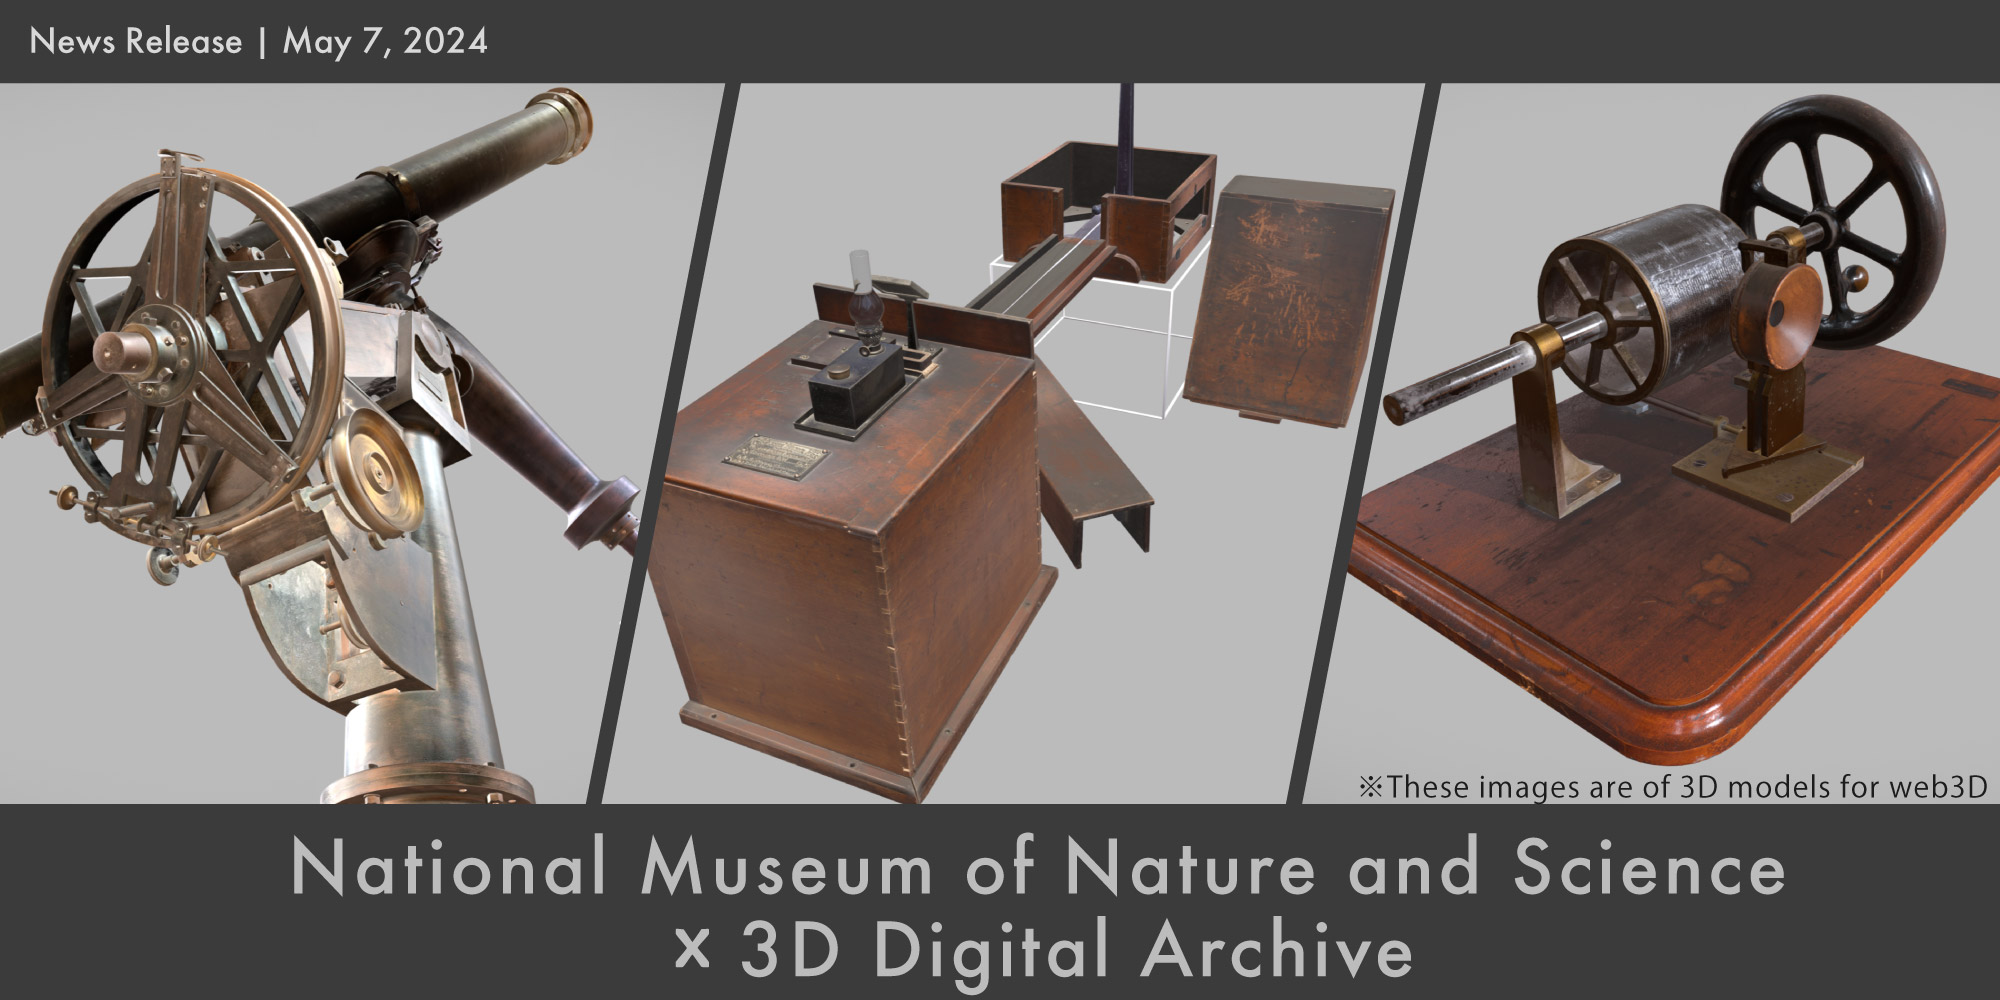 StockGraphy has been entrusted with the high-precision 3D scanning and 3D model optimization for the important cultural properties Troughton Astronomical Telescope, Milne Horizontal Pendulum Seismograph and Ewing's Voice Reproduction Device